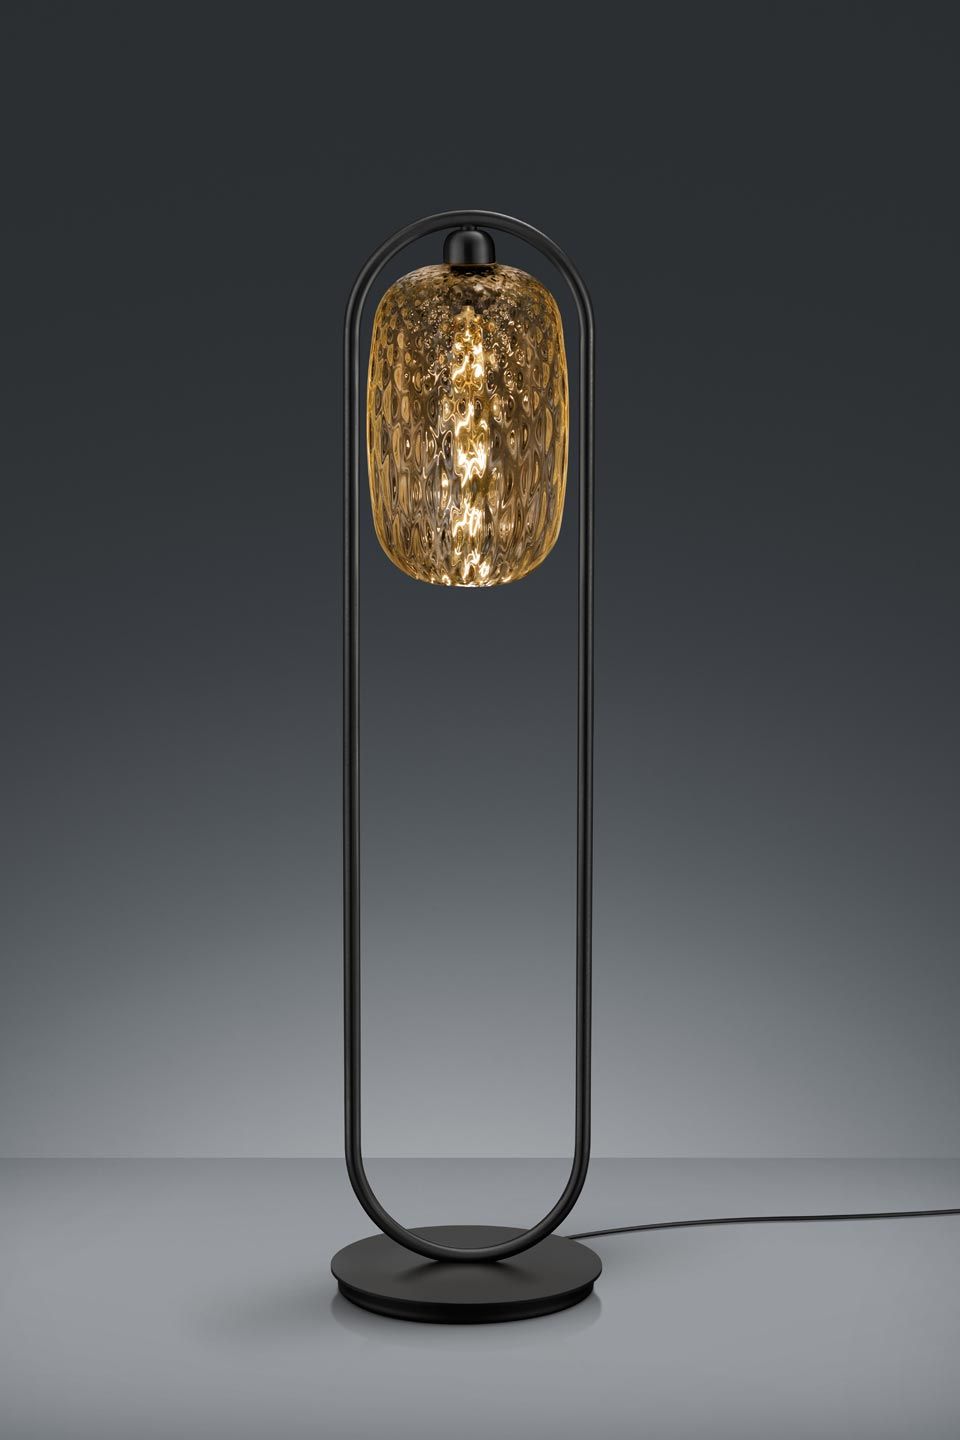 Current Black Metal Standing Lamps Pertaining To Black Floor Lamp And Amber Carved Glass, Exists In Clear Glass And Golden  Metal: Baulmann Leuchten Luxury Lightings Made In Germany – Réf (View 7 of 15)